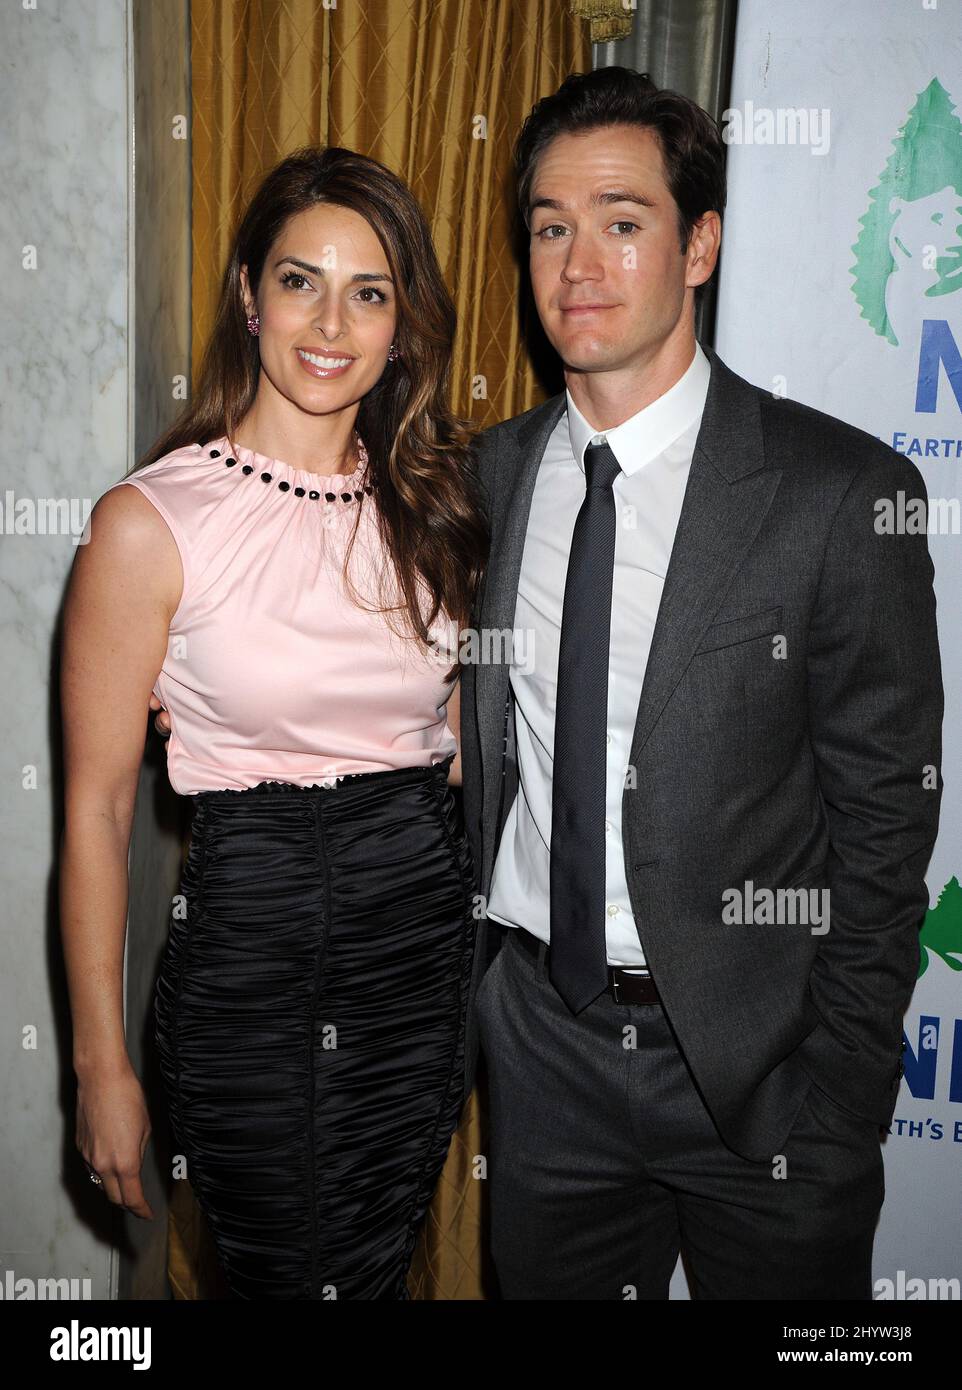 Mark-Paul Gosselaar and Lisa Ann Russell attends NRDC's 20th Anniversary at the Wilshire Hotel in Beverly Hills, CA, USA. Stock Photo